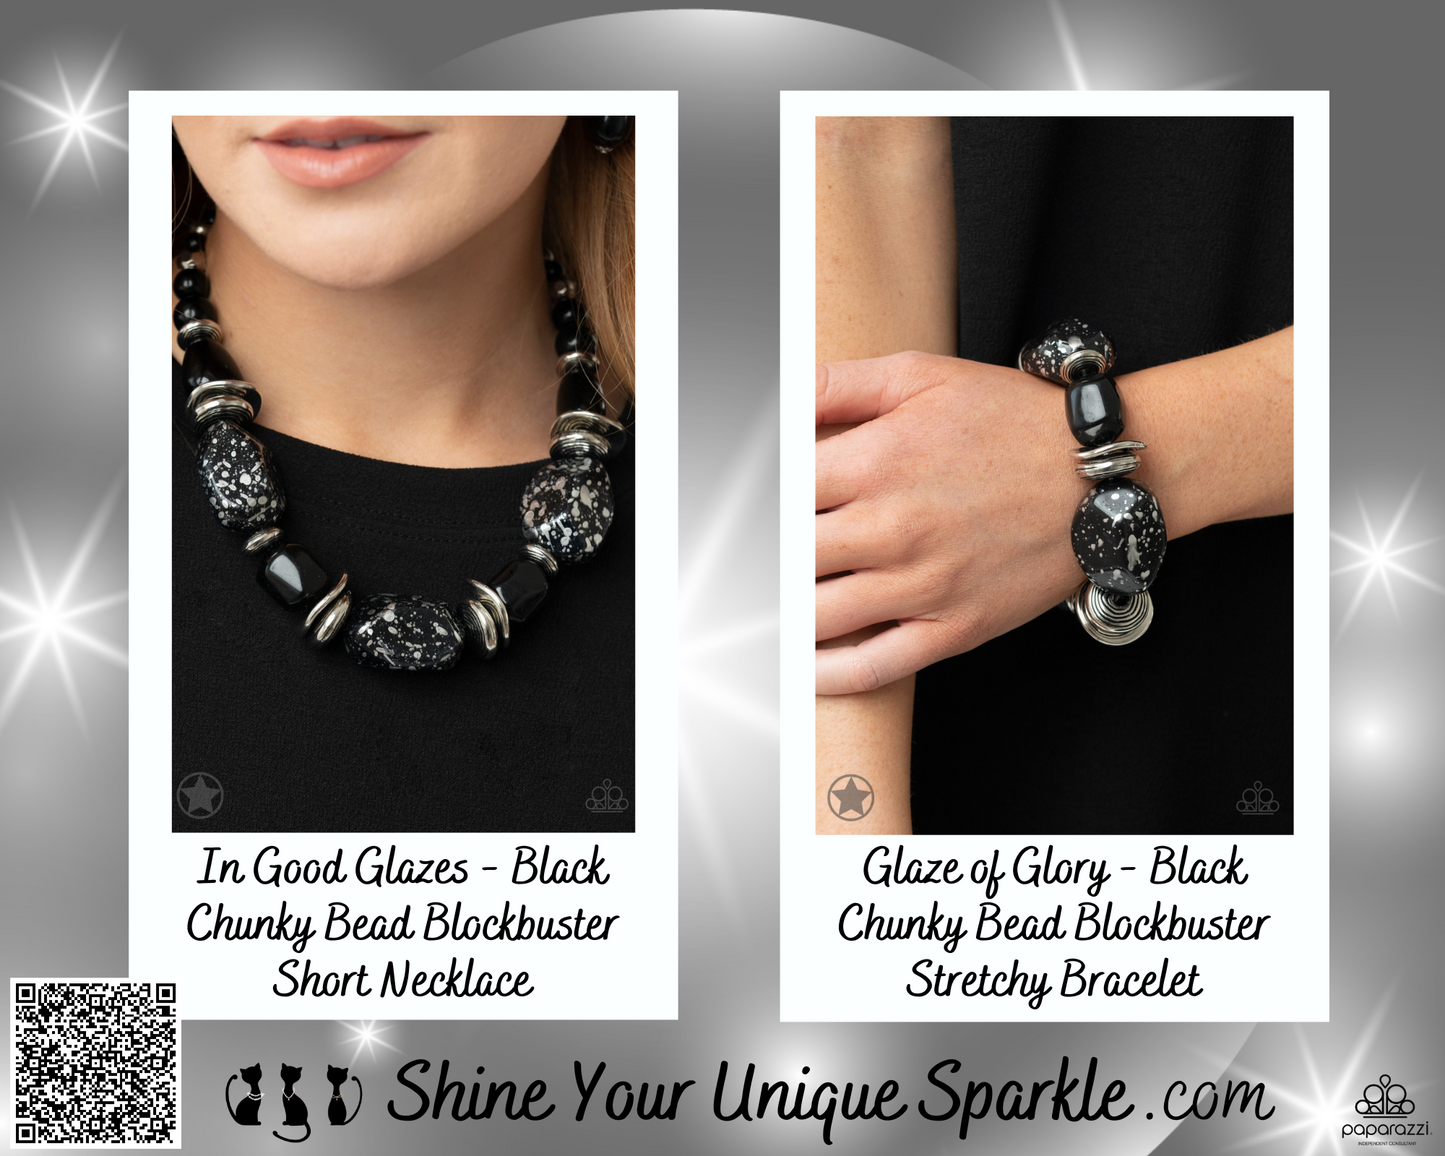 PERFECT MATCH / SET: In Good Glazes - Black Chunky Bead Blockbuster Short Necklace and  Glaze of Glory - Black Chunky Bead Blockbuster Stretchy Bracelet